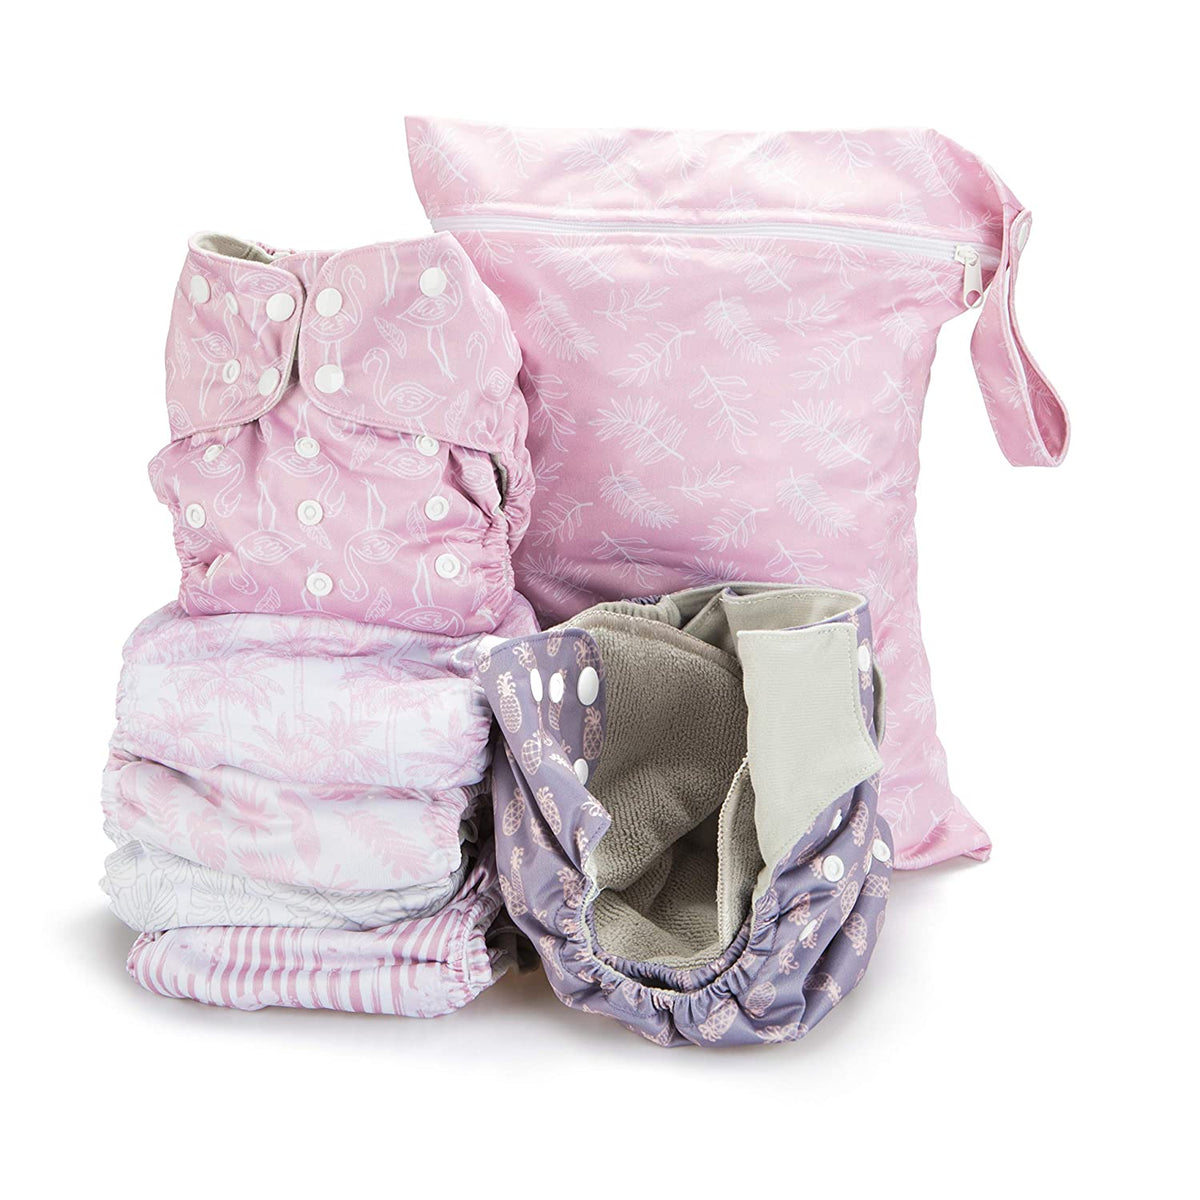 Reusable Nappy - Simple, Washable and Adjustable Cloth Nappies